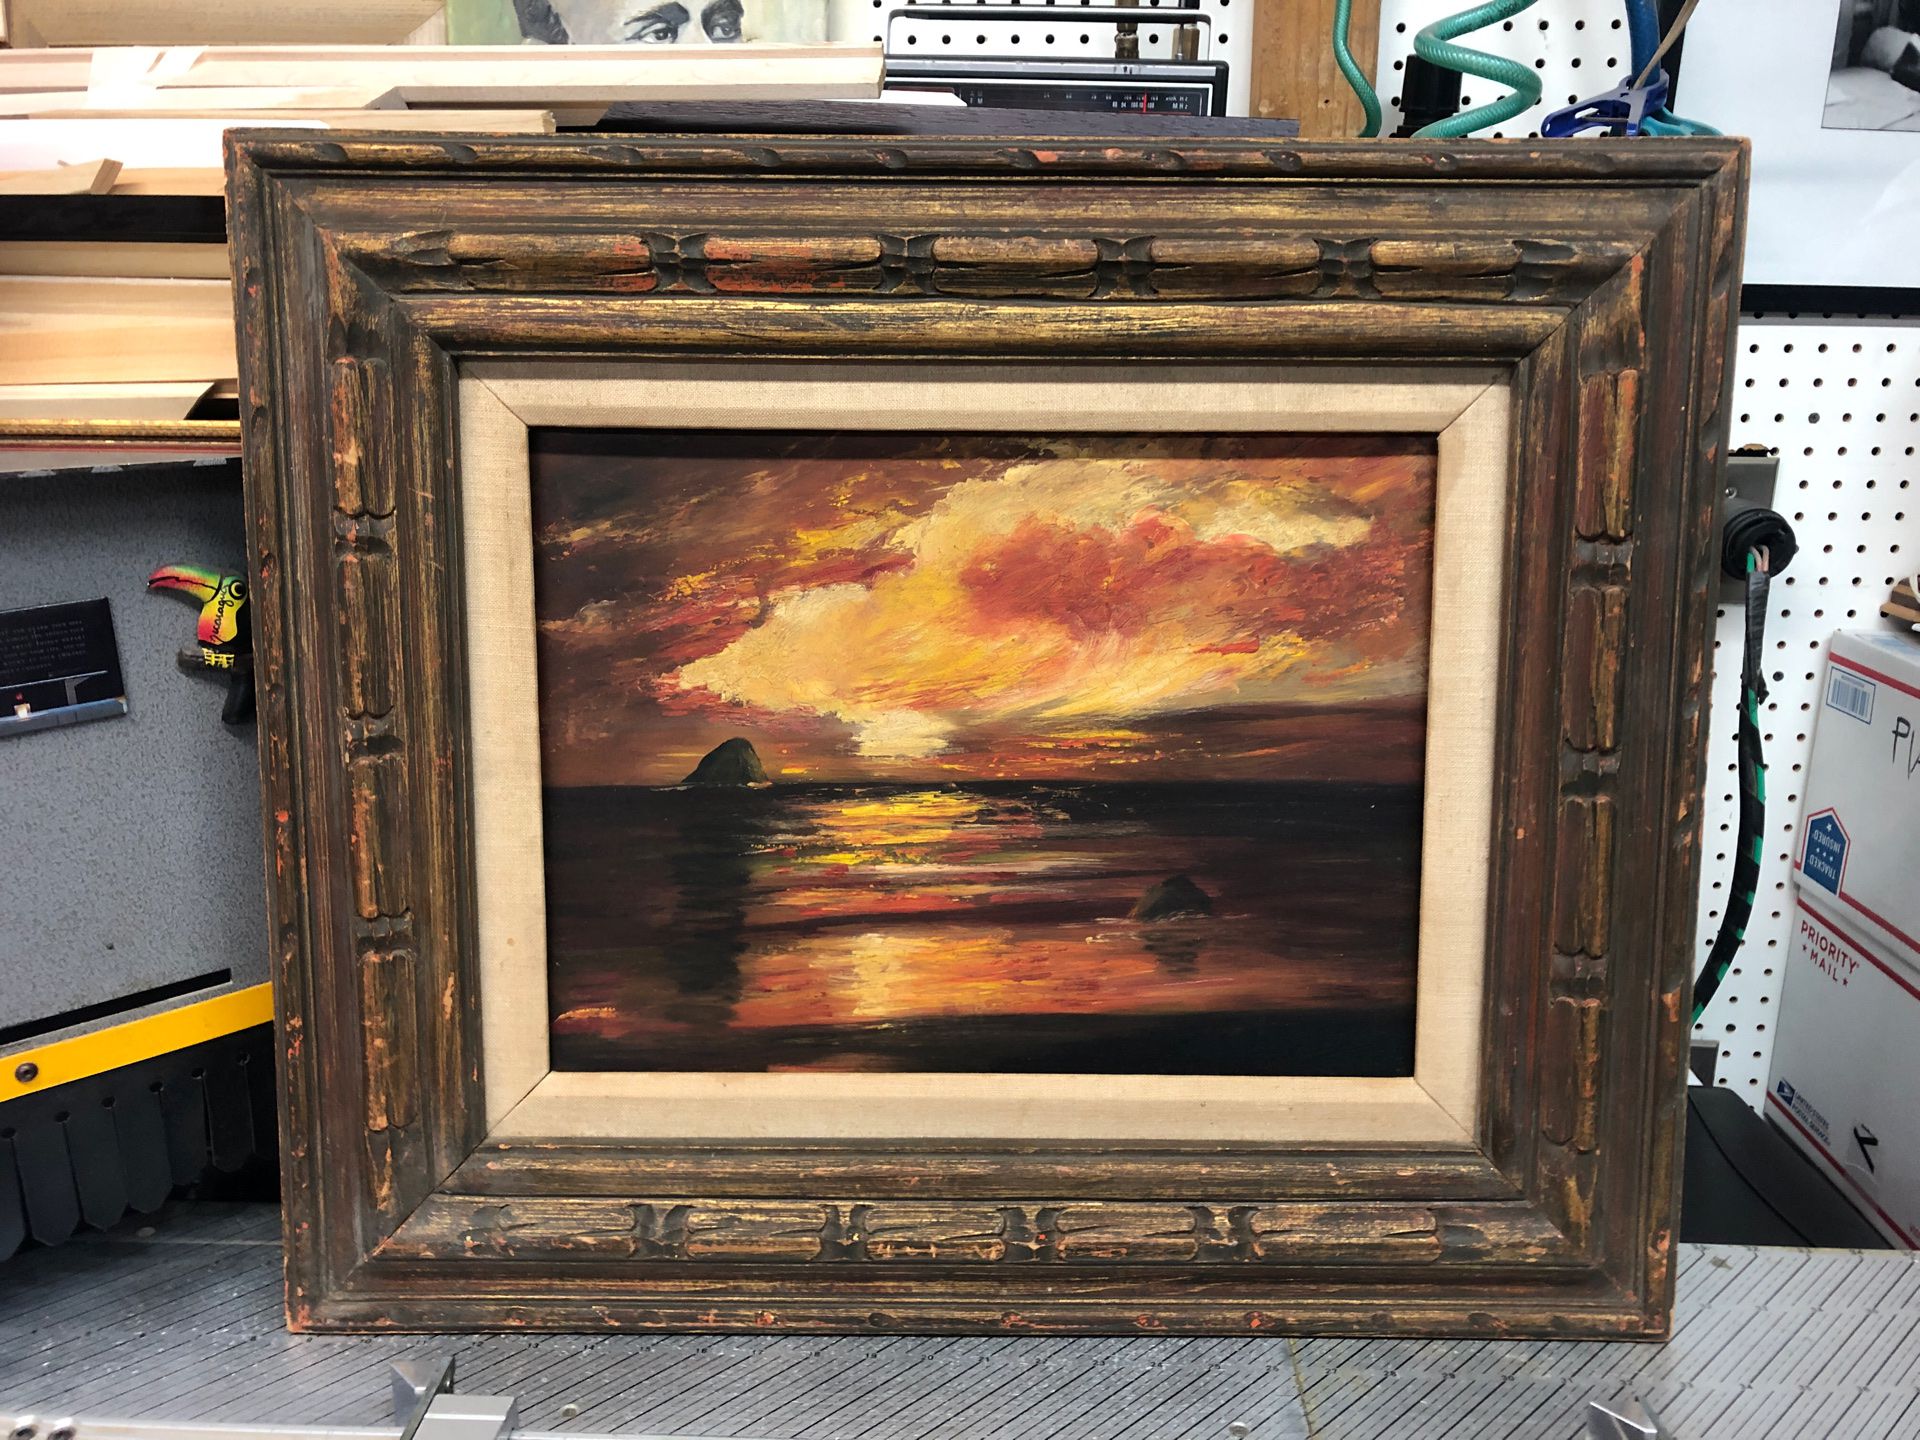 Original oil painting on board red ocean sunset seascape framed vintage 16x12” board with frame 25x21”